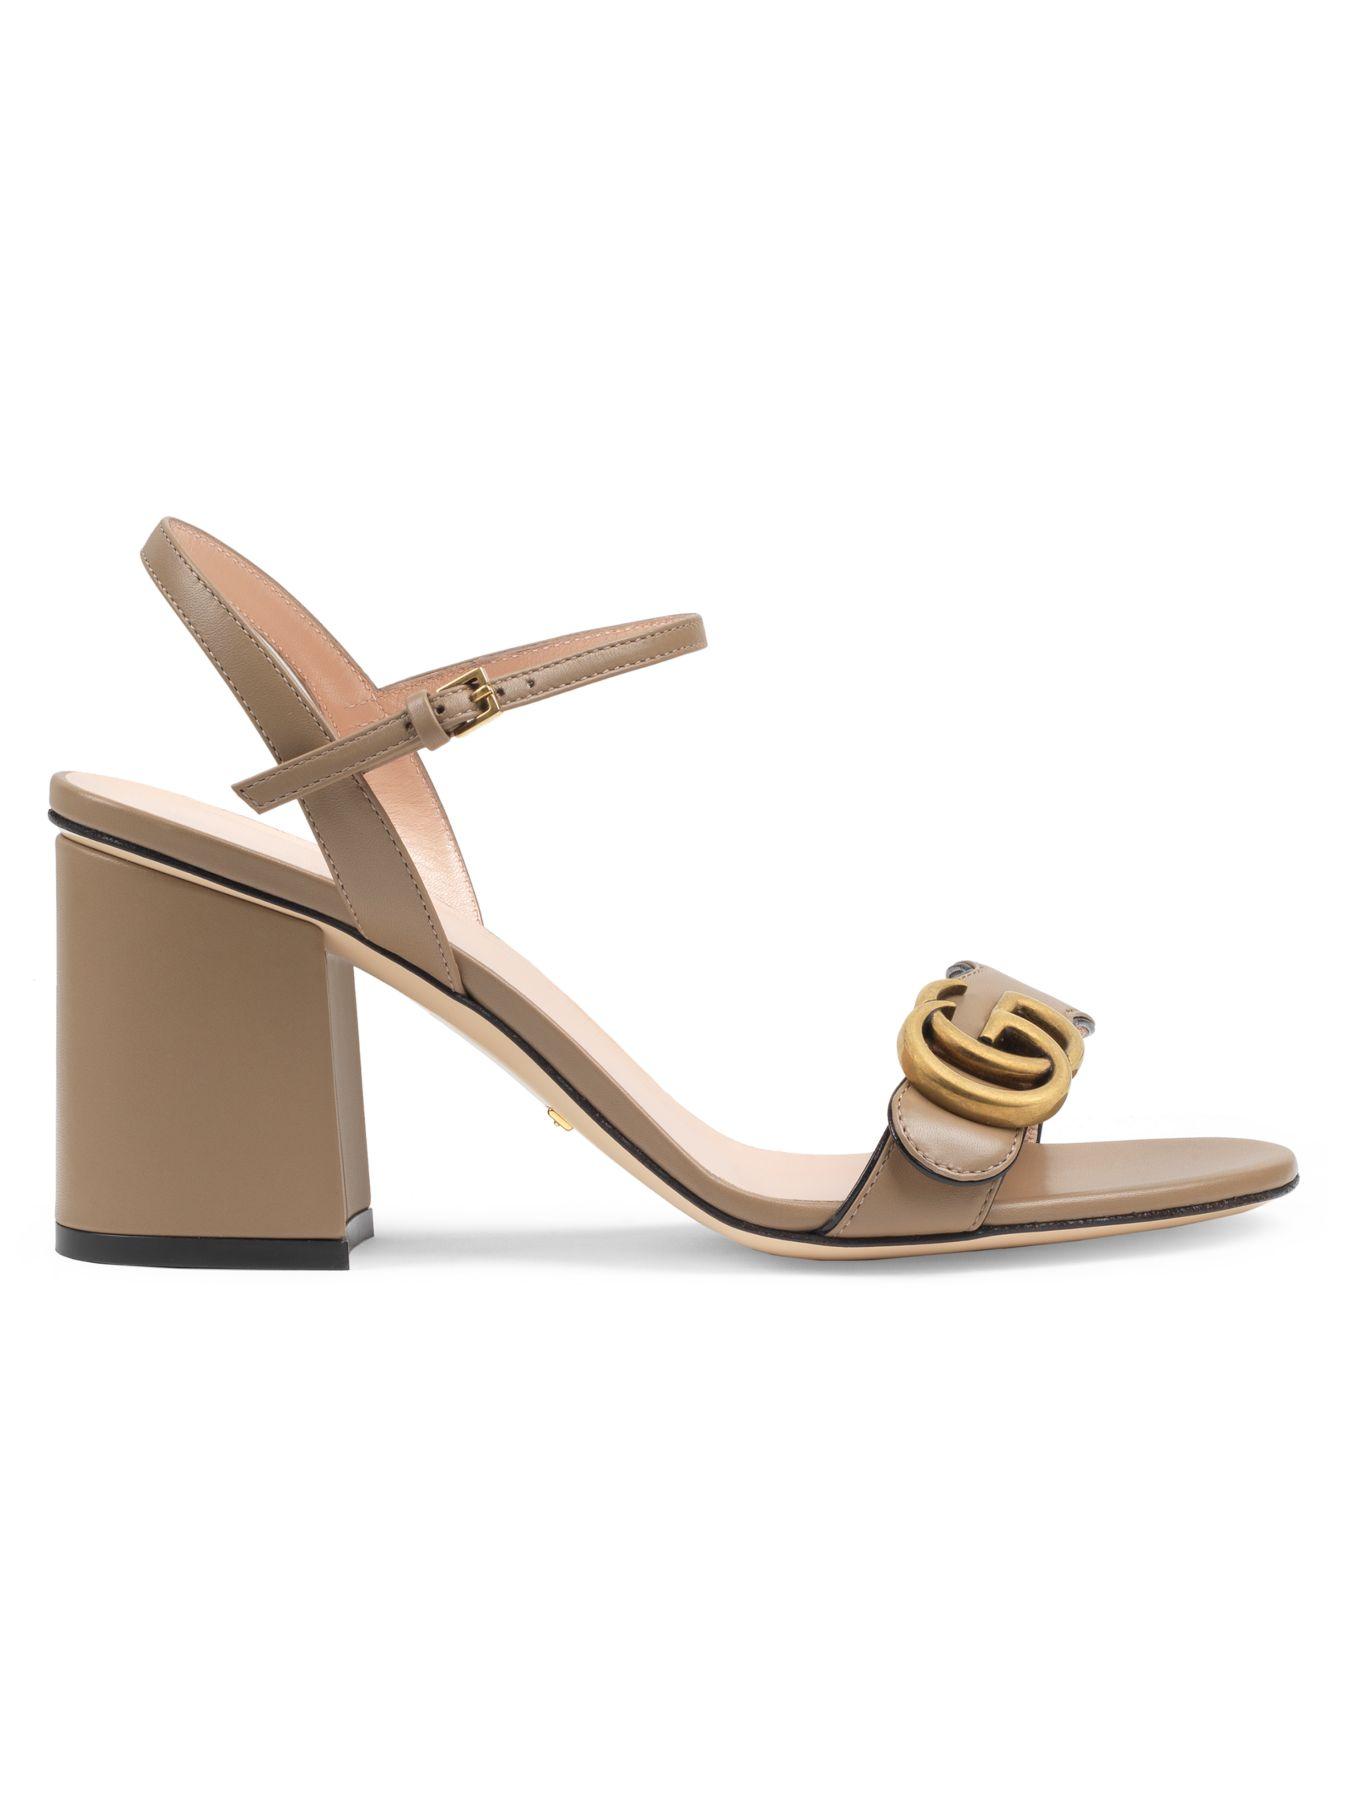 Gucci Leather Marmont GG Ankle-strap Sandals in Beige (Metallic) - Save ...